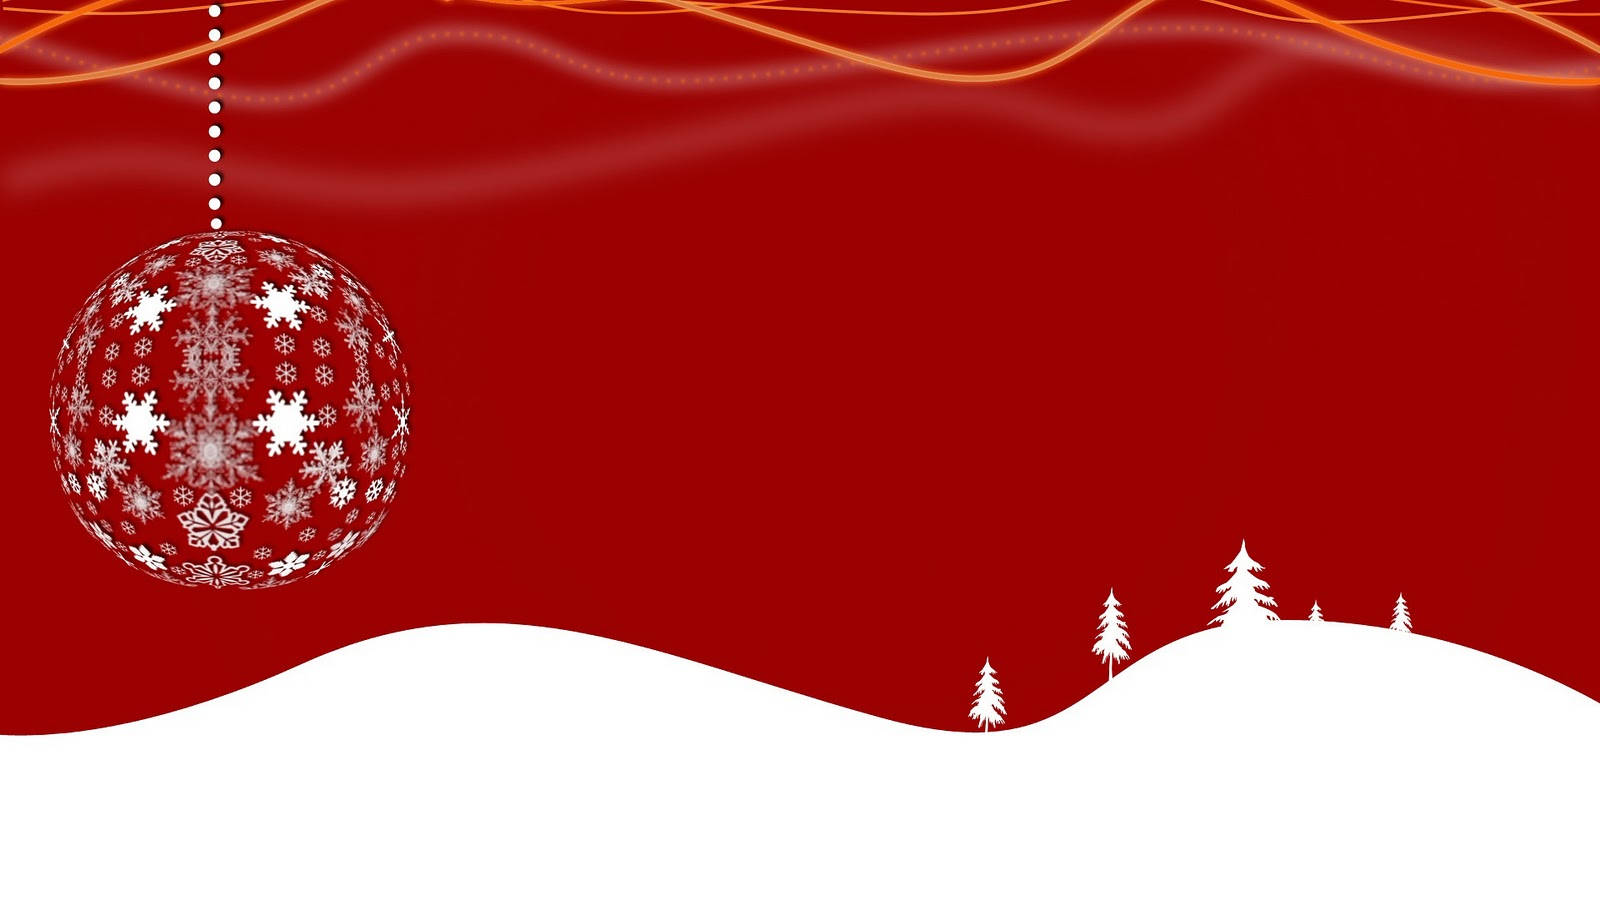 Snowfield On Red Christmas Background Wallpaper